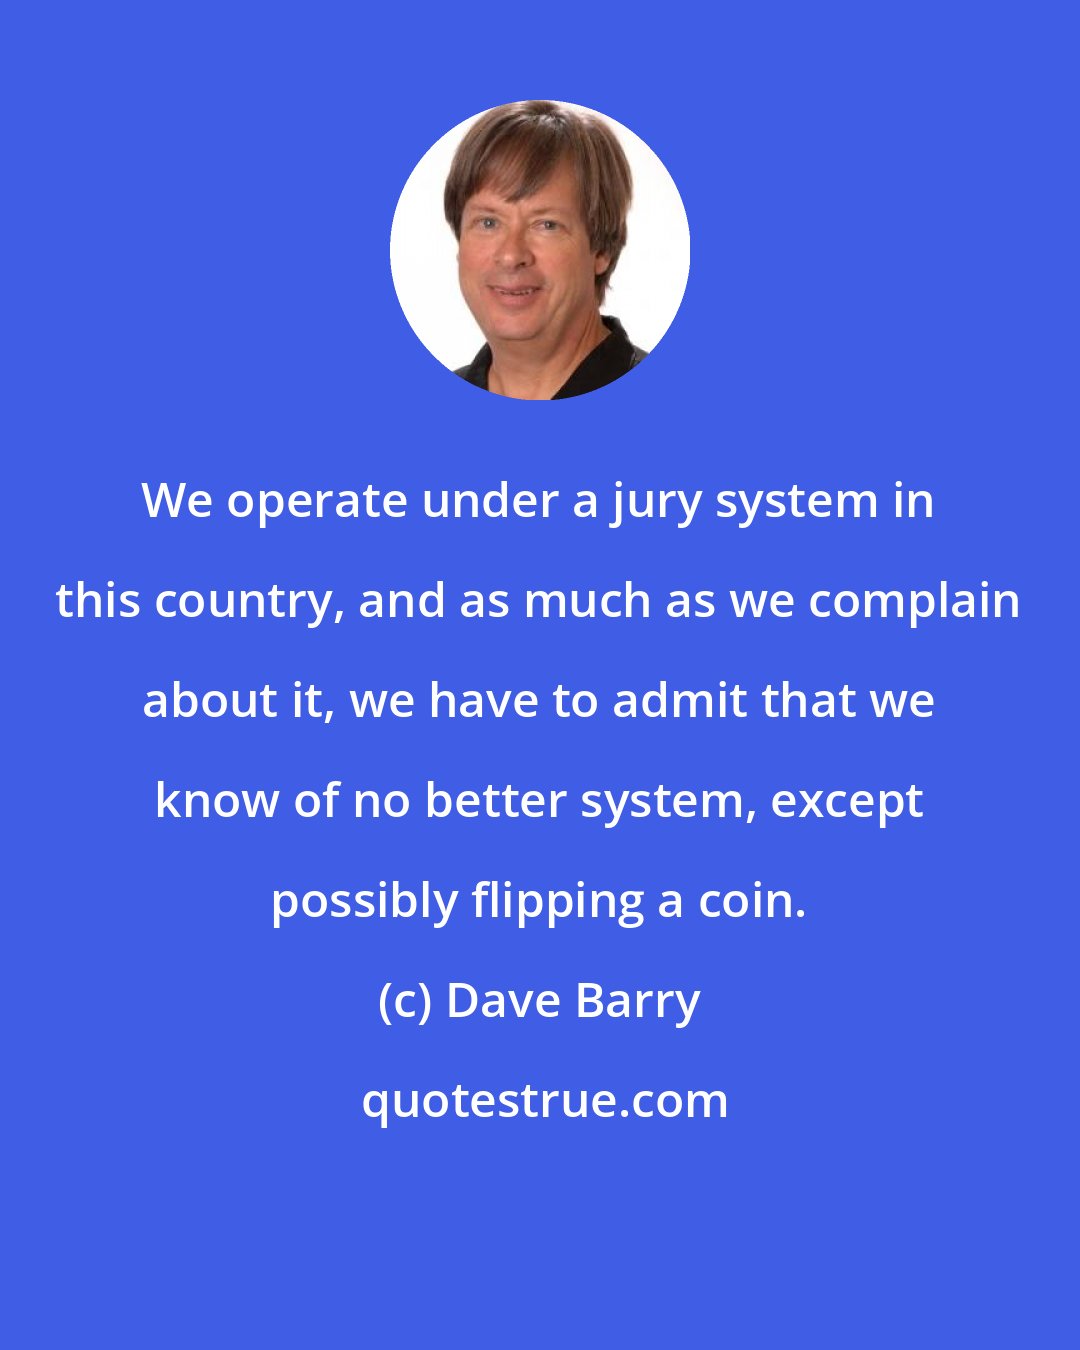 Dave Barry: We operate under a jury system in this country, and as much as we complain about it, we have to admit that we know of no better system, except possibly flipping a coin.